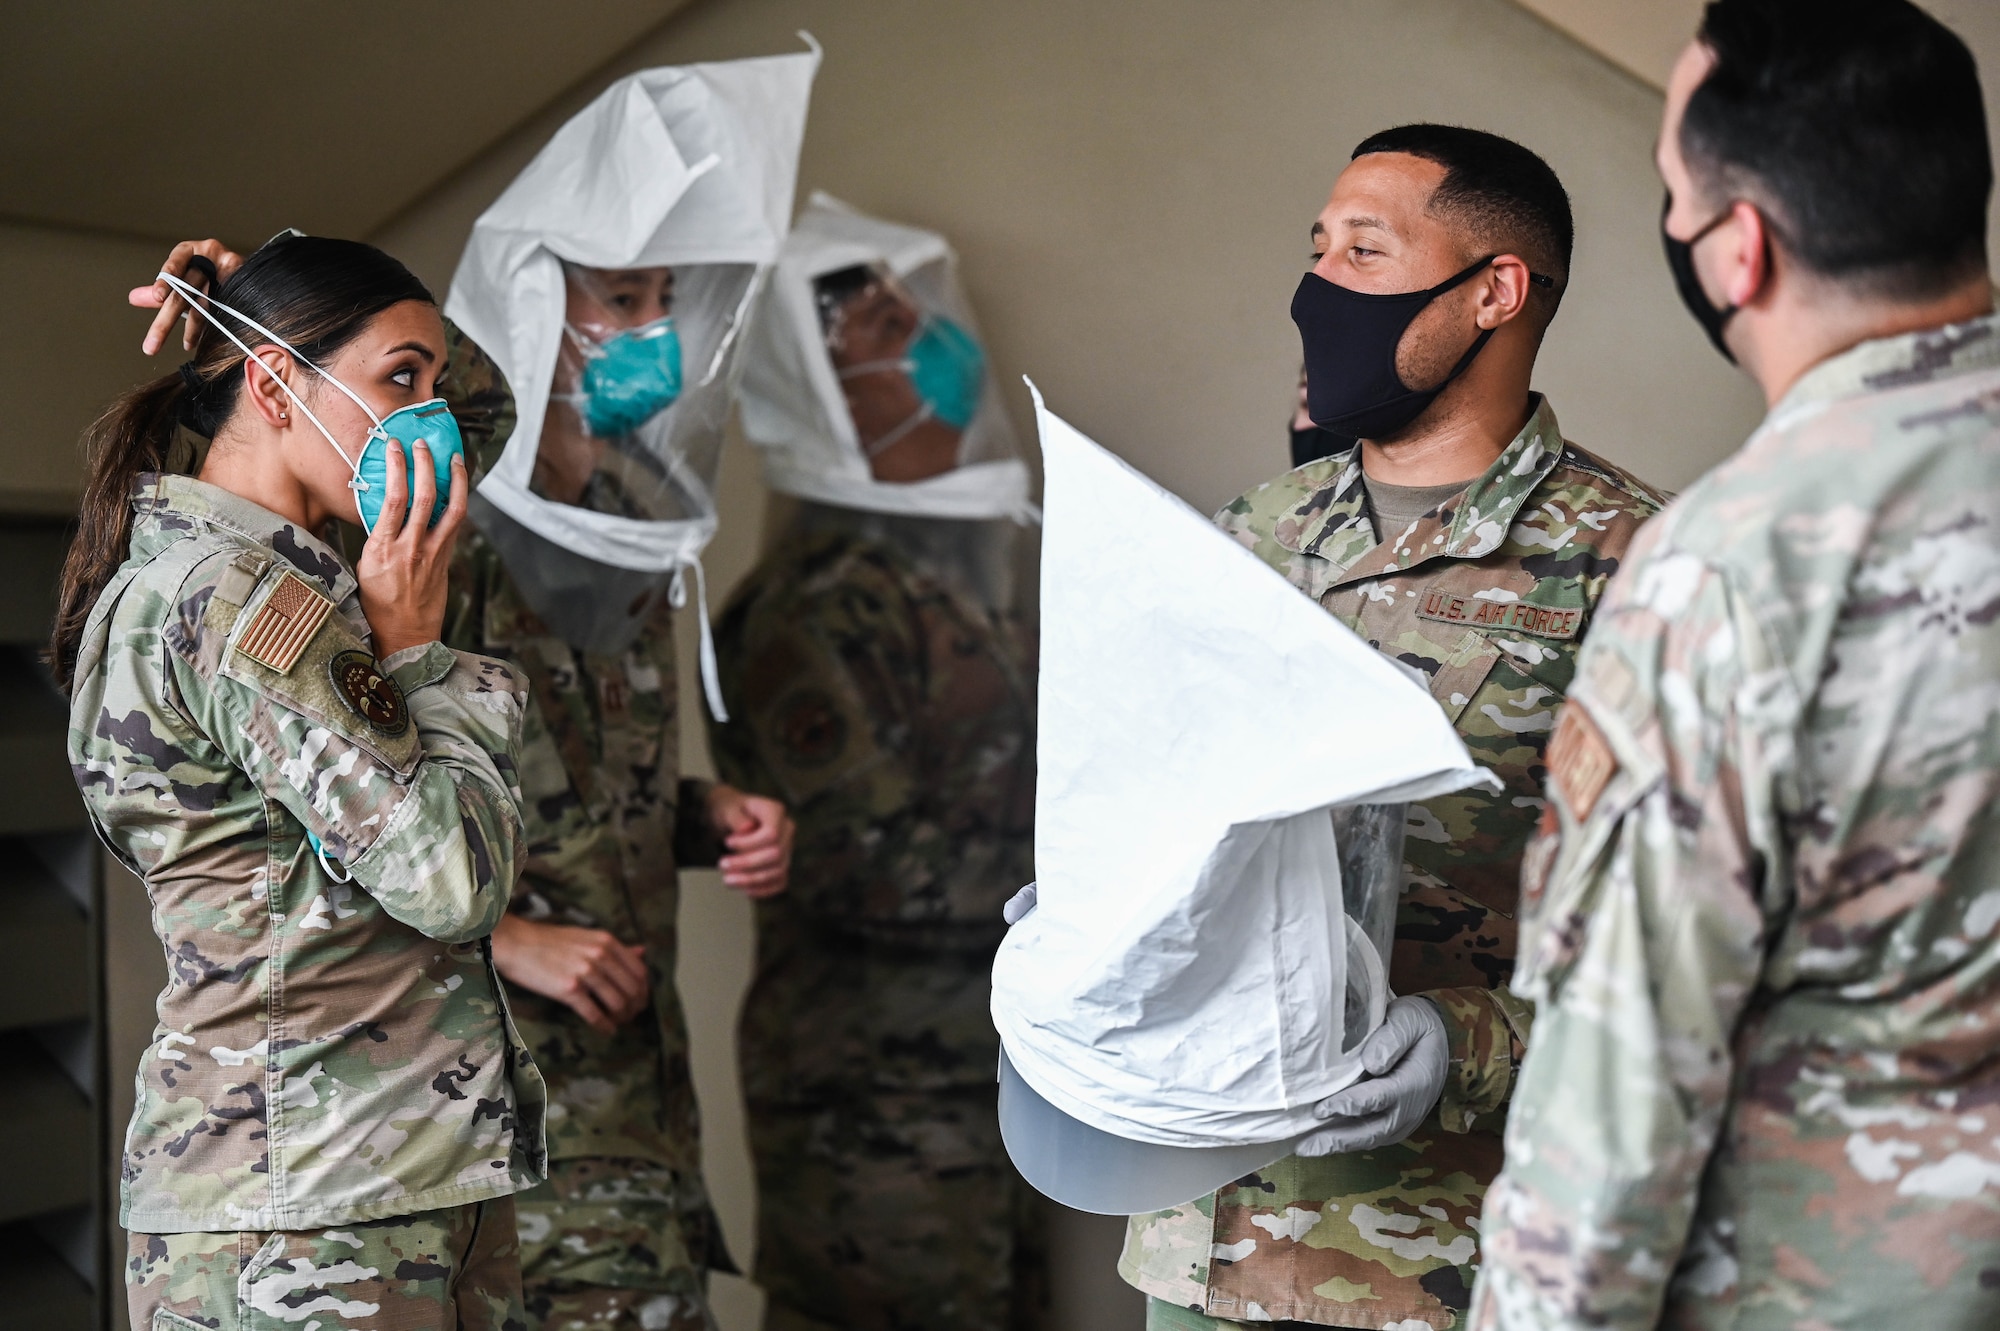 Airmen assigned to the 15th Operational Medical Readiness Squadron bioenvironmental flight perform N95 mask fit test on 15th Medical Group personnel at Joint Base Pearl Harbor-Hickam, Hawaii, Jan. 7, 2022. Fit tests were performed to ensure medical personnel are properly wearing personal protective equipment while conducting patient care during the current pandemic. (U.S. Air Force photo by Staff Sgt. Alan Ricker)